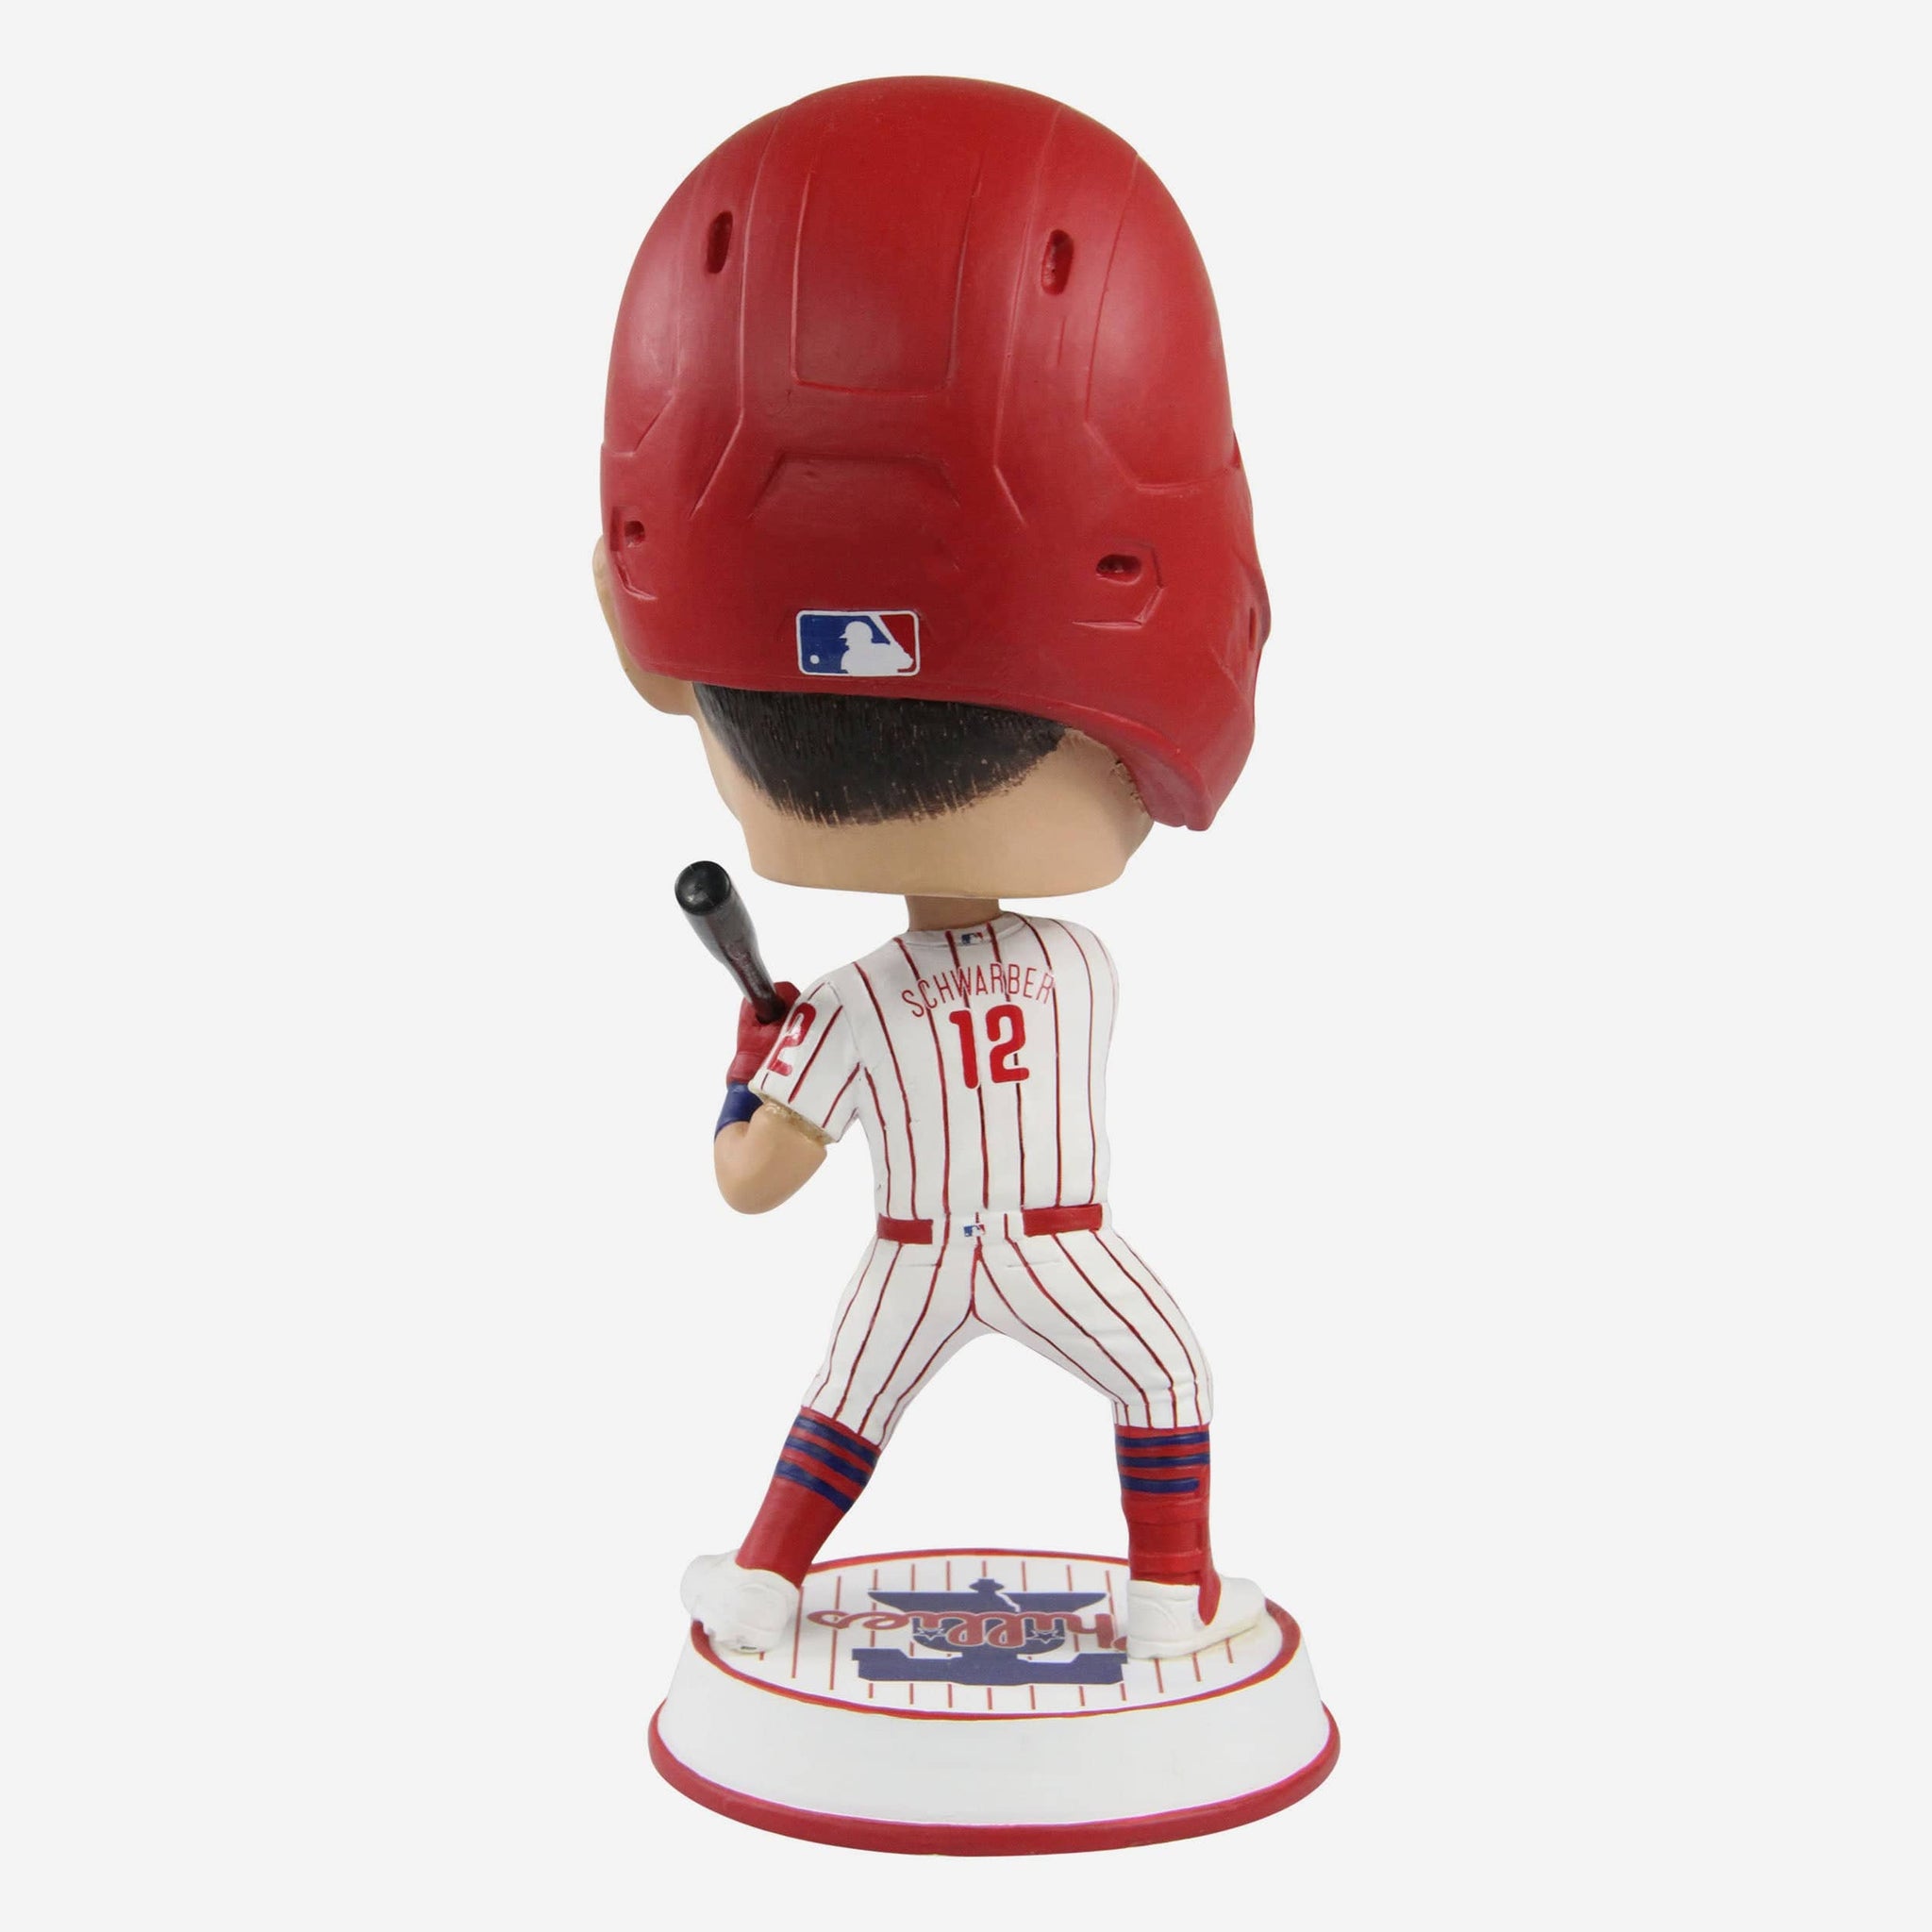 Philadelphia Phillies: Kyle Schwarber 2022 - Officially Licensed MLB R –  Fathead